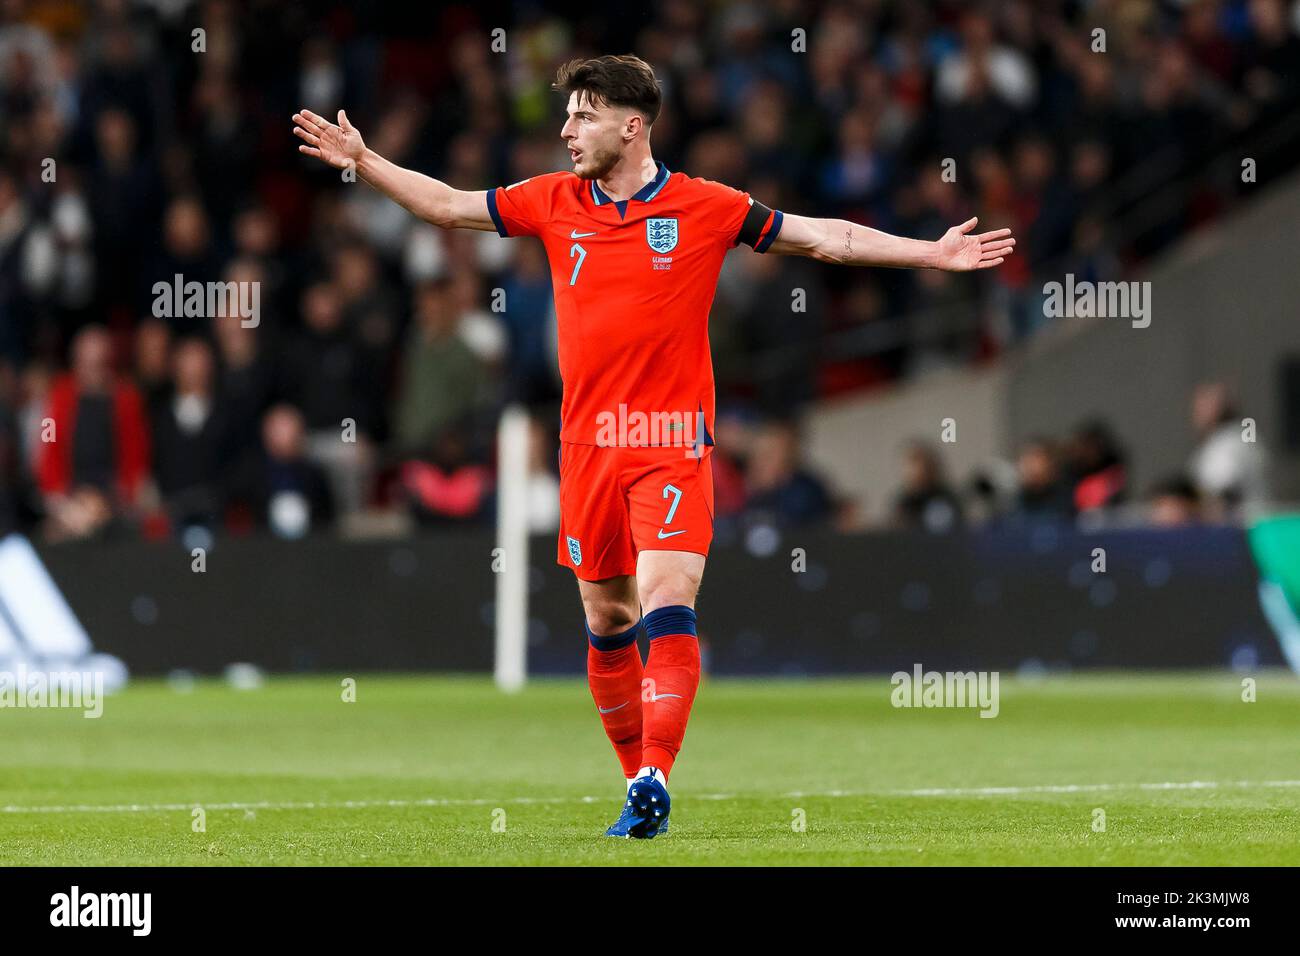 London, UK. 26th Sep, 2022. Declan Rice of England during the UEFA Nations League Group C match between England and Germany at Wembley Stadium on September 26th 2022 in London, England. (Photo by Daniel Chesterton/phcimages.com) Credit: PHC Images/Alamy Live News Stock Photo